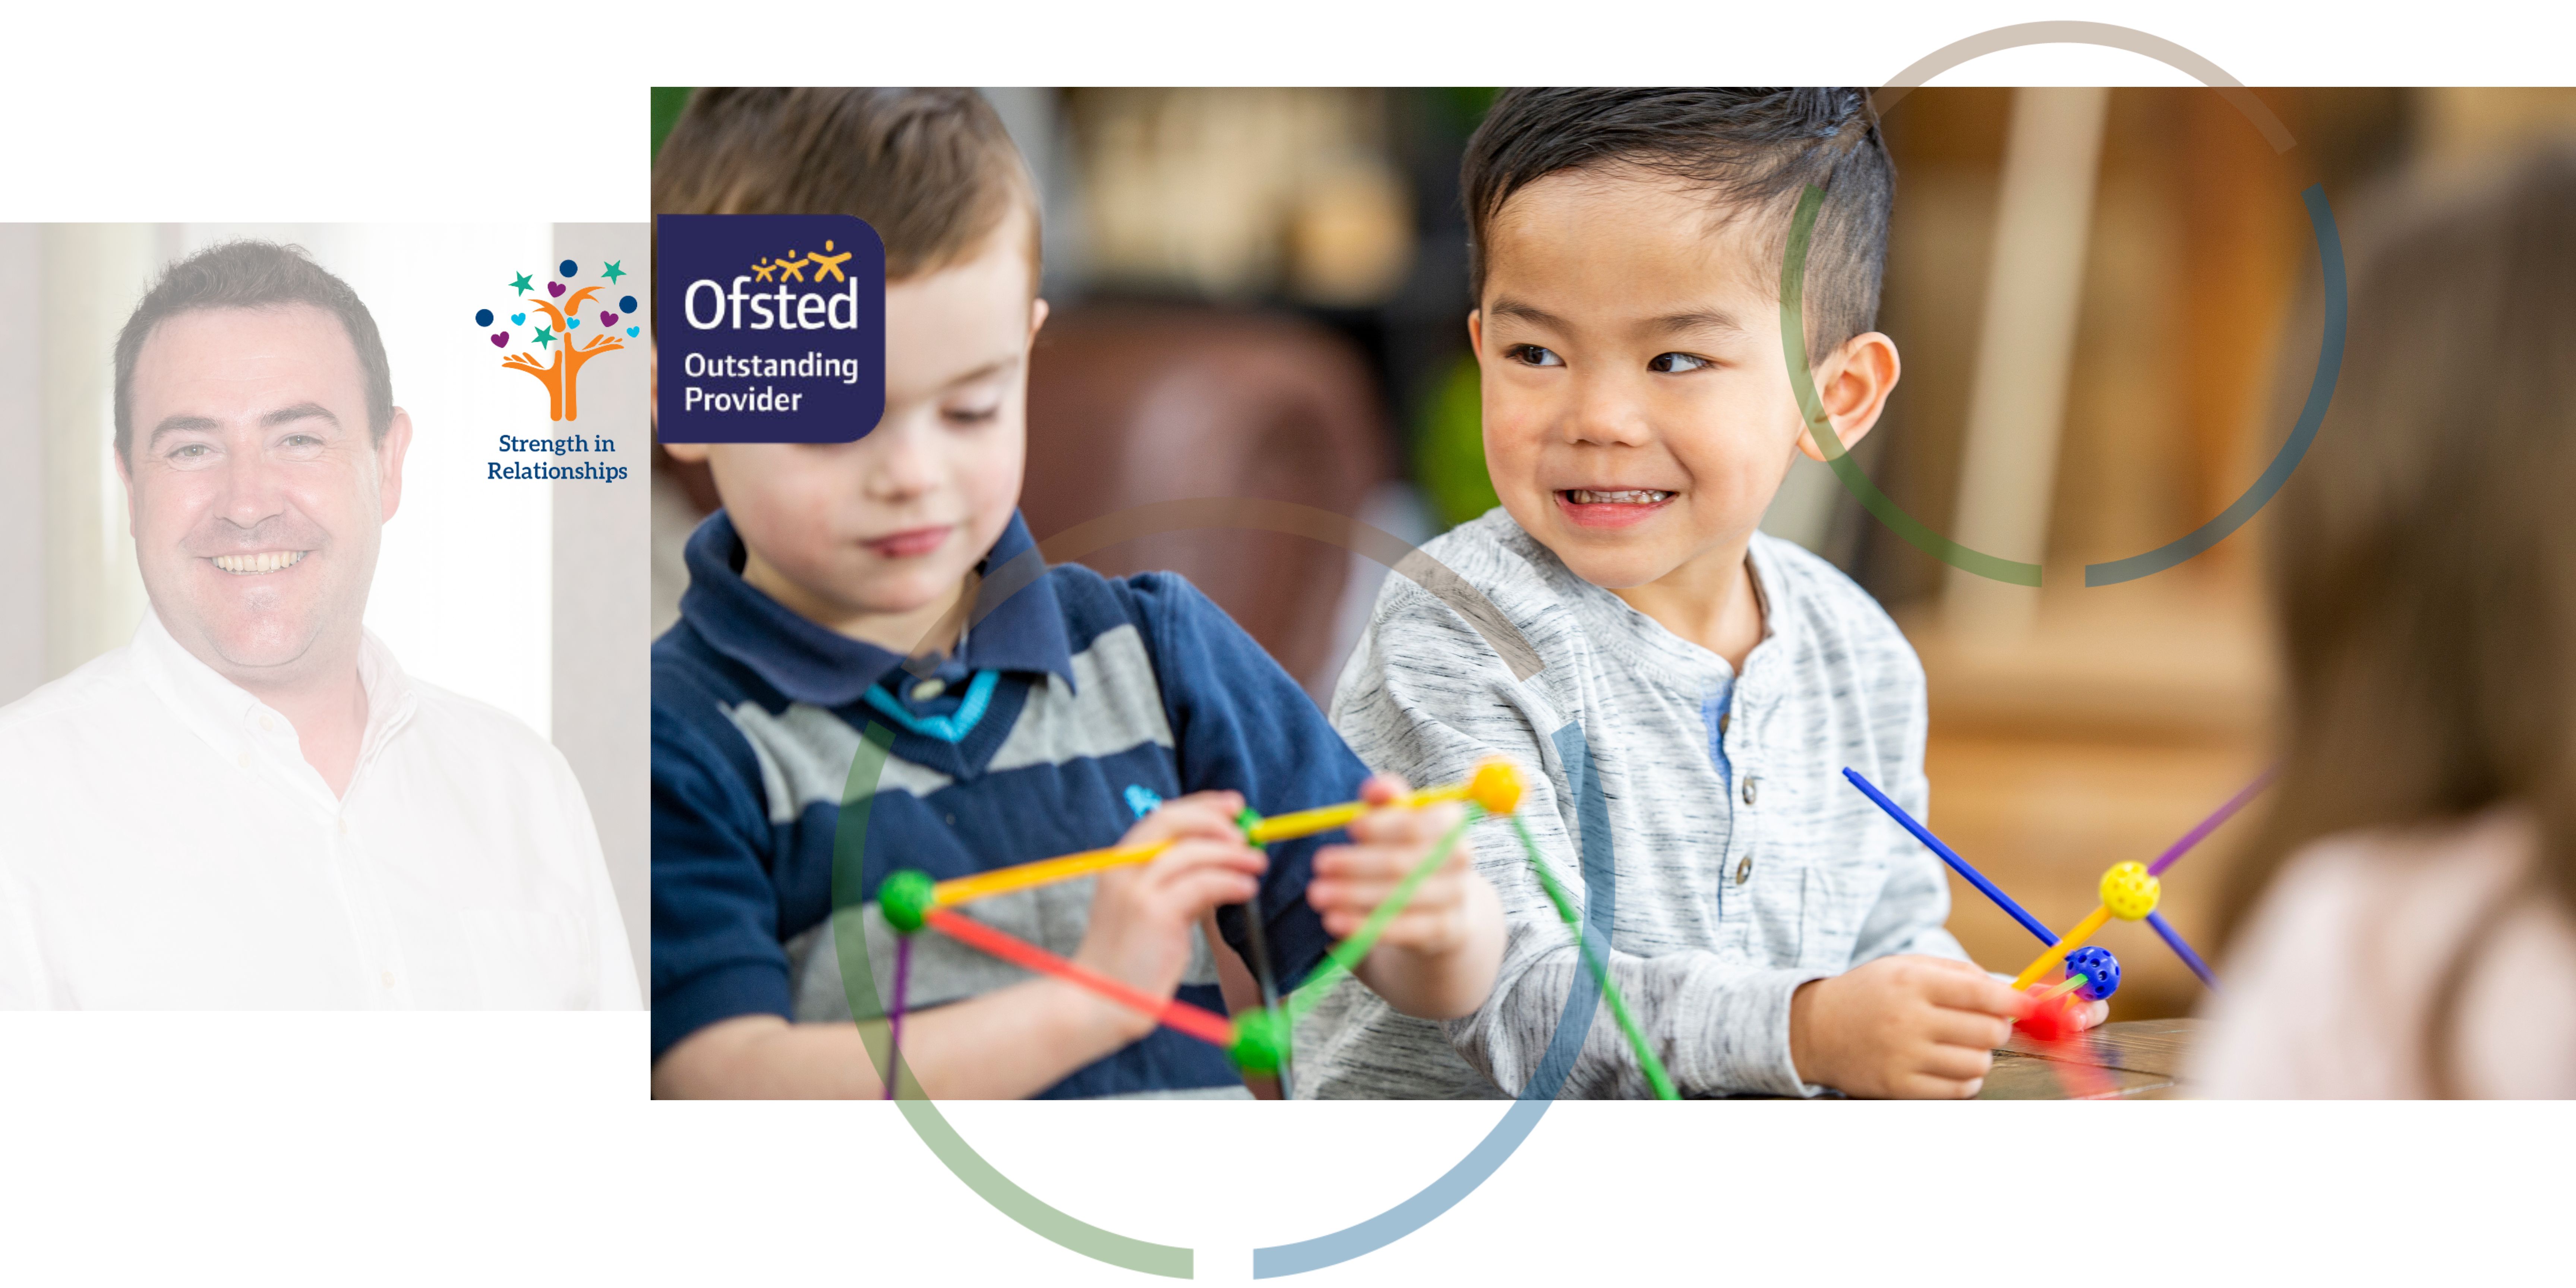 A portrait photograph of a member of the children and families social work team next to an image of children playing with building toys with the Ofsted and strength in partnerships logos.